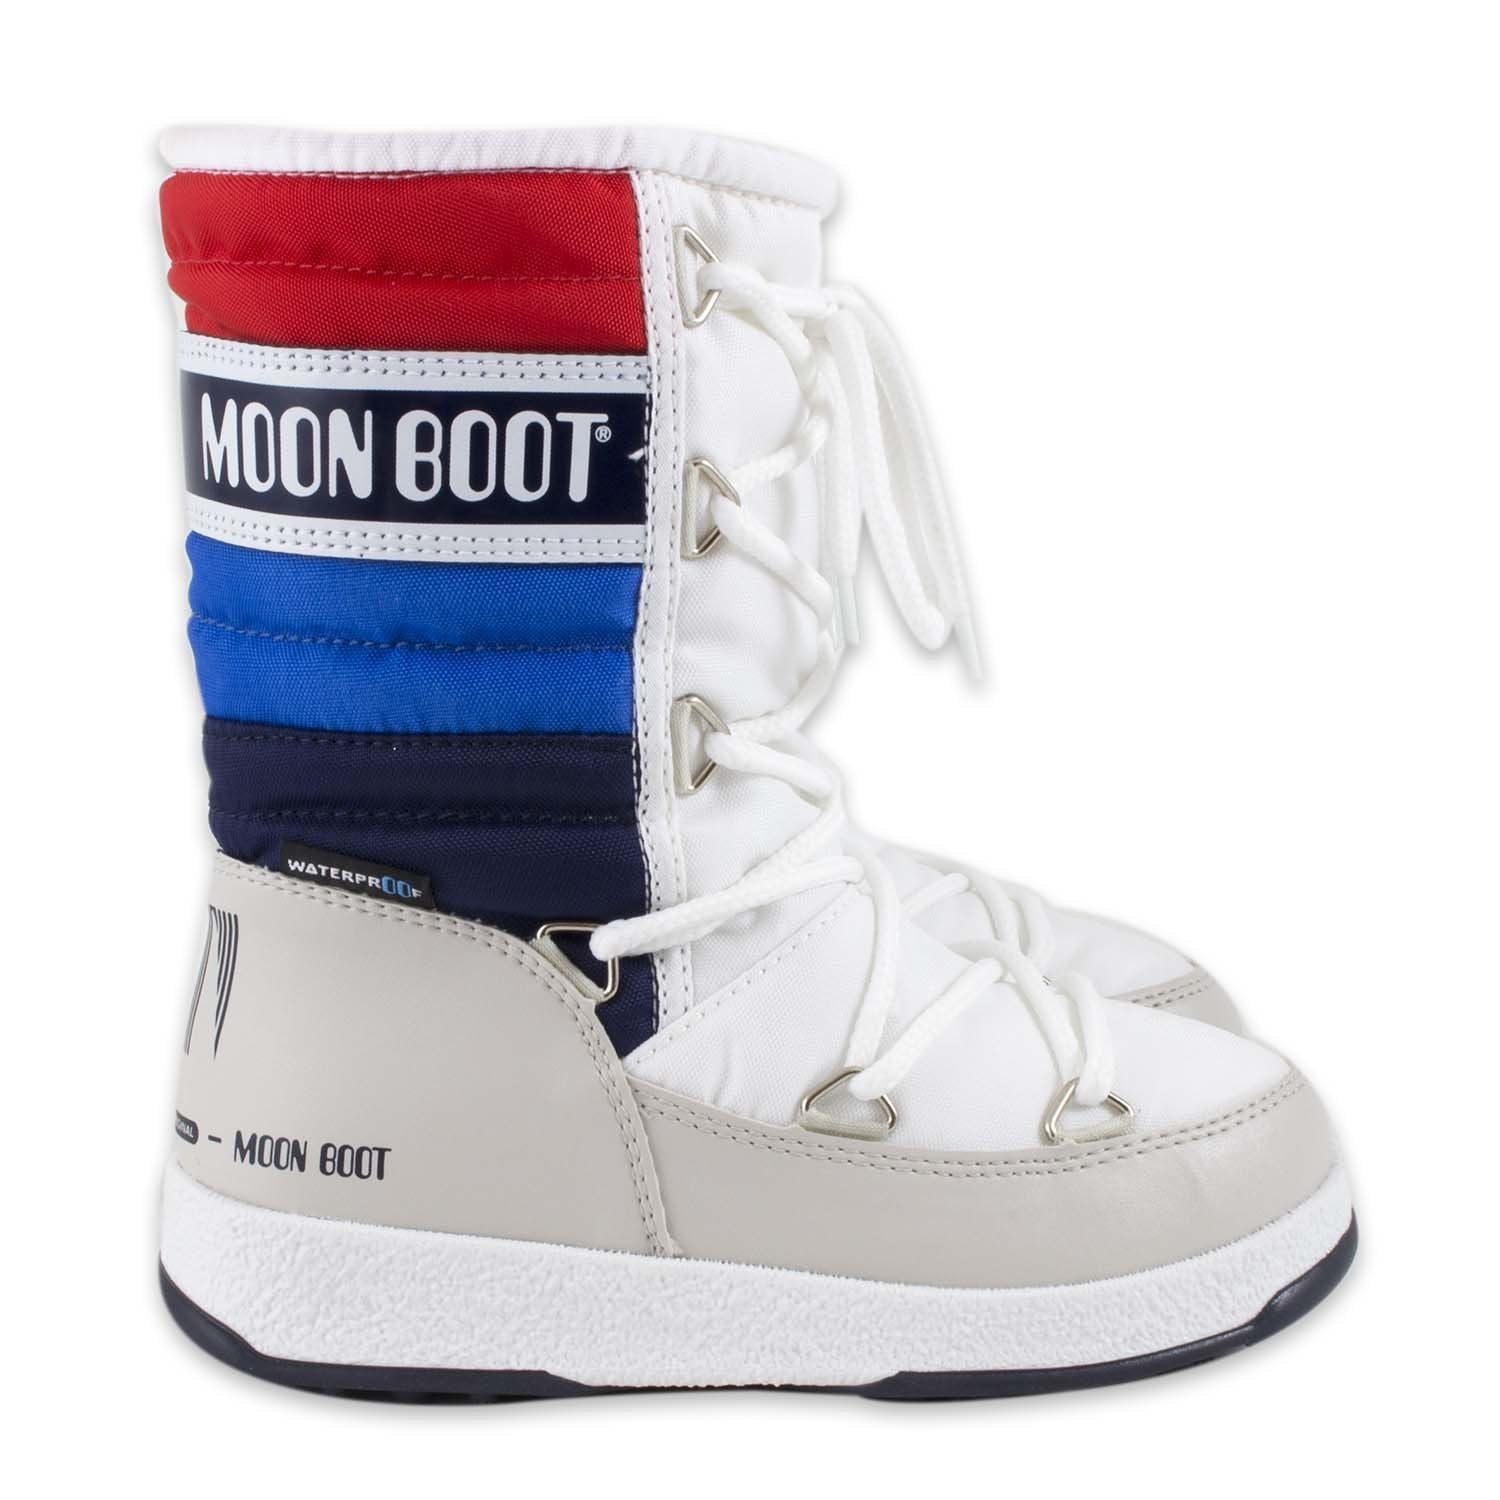 Moon Boot Quilted 2-Fille-MOON BOOT-Maralex Paris (1975668932671)